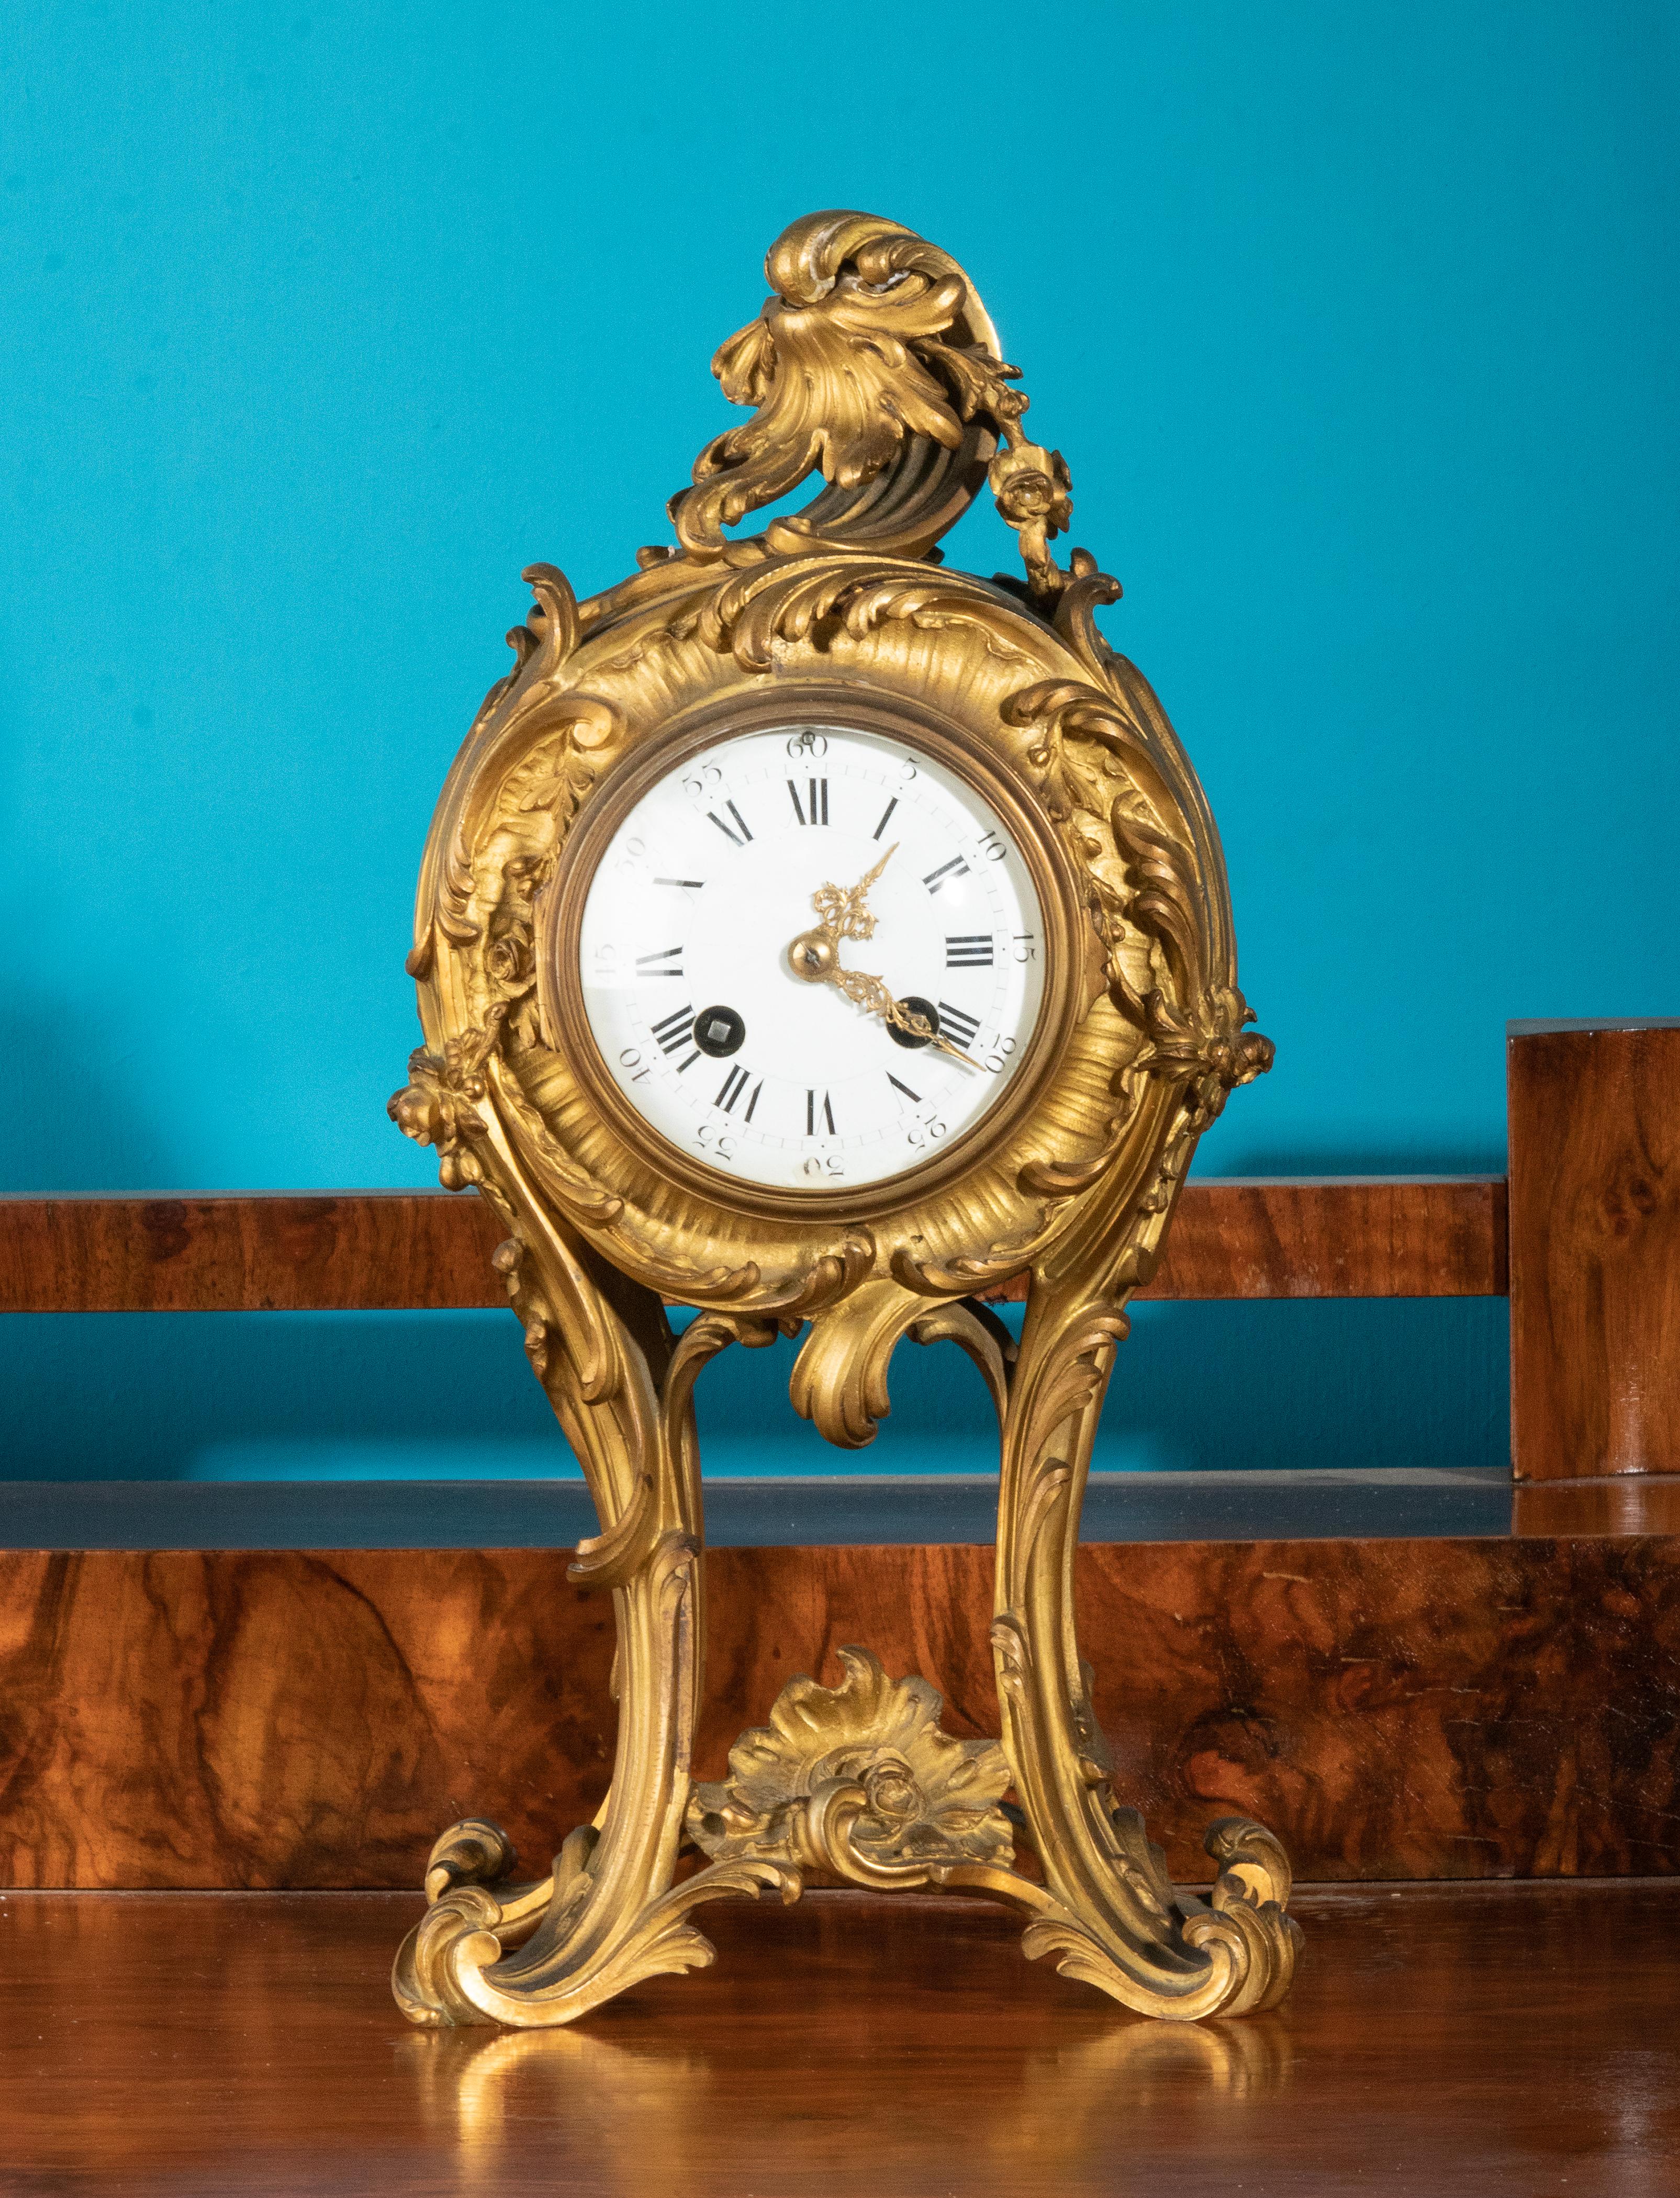 An elegant French mantel clock/pendule, made of gilt bronze. The whole in Louis XV style. The clock is made in France 1880-1890. Fine bronze case with typical asymmetric floral motifs in Rococo style. The dial is enameled, at the Roman number VI is